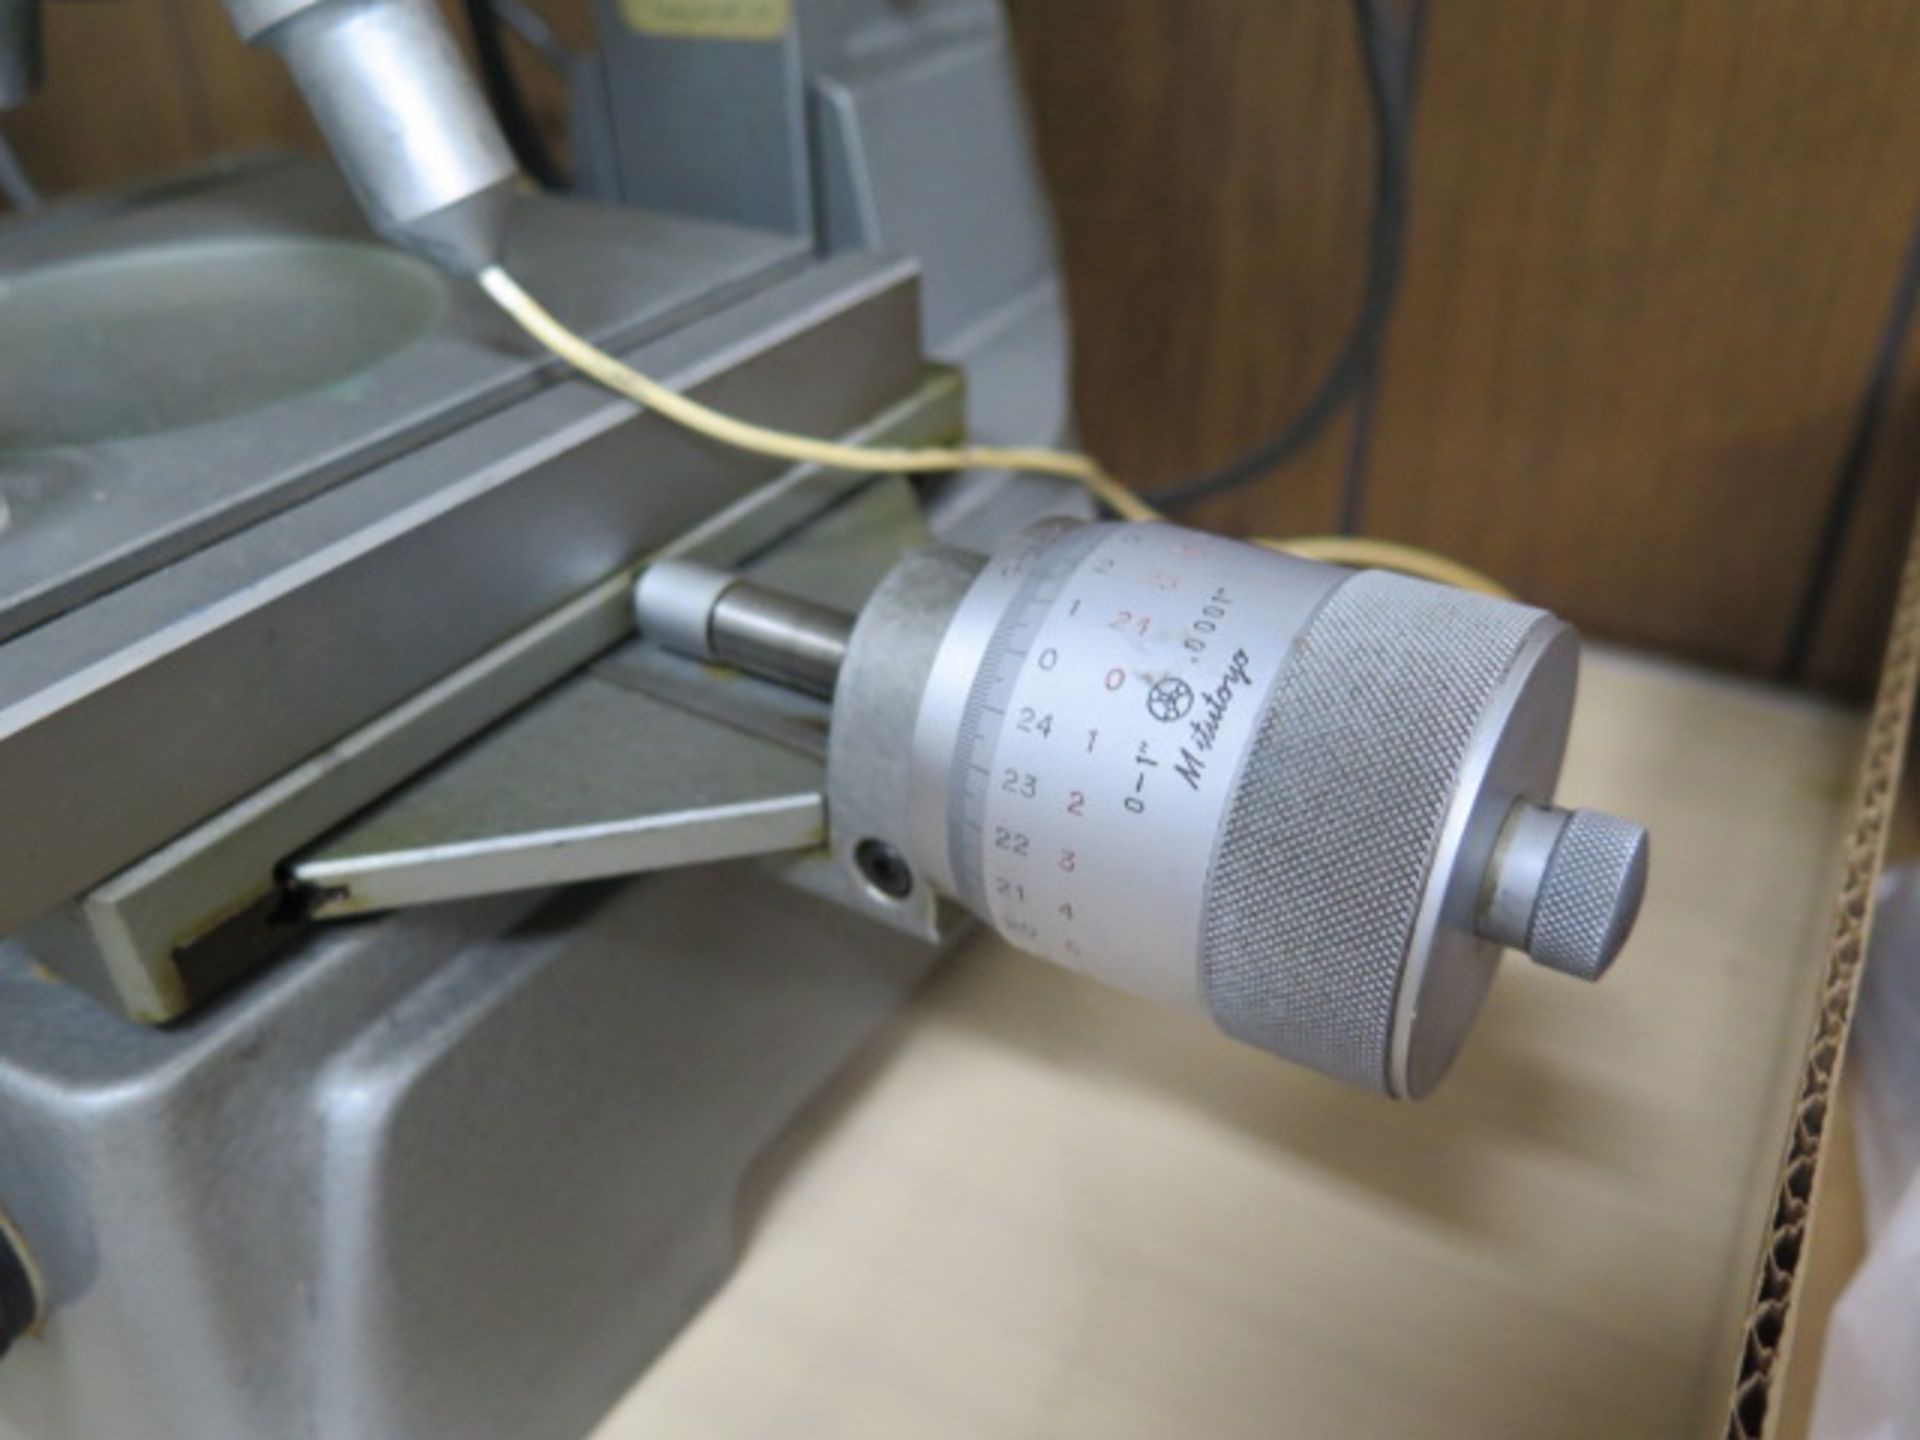 Mitutoyo BI-4 Tool Makers Microscope s/n 4351 w/ Light Source (SOLD AS-IS - NO WARRANTY) - Image 6 of 9